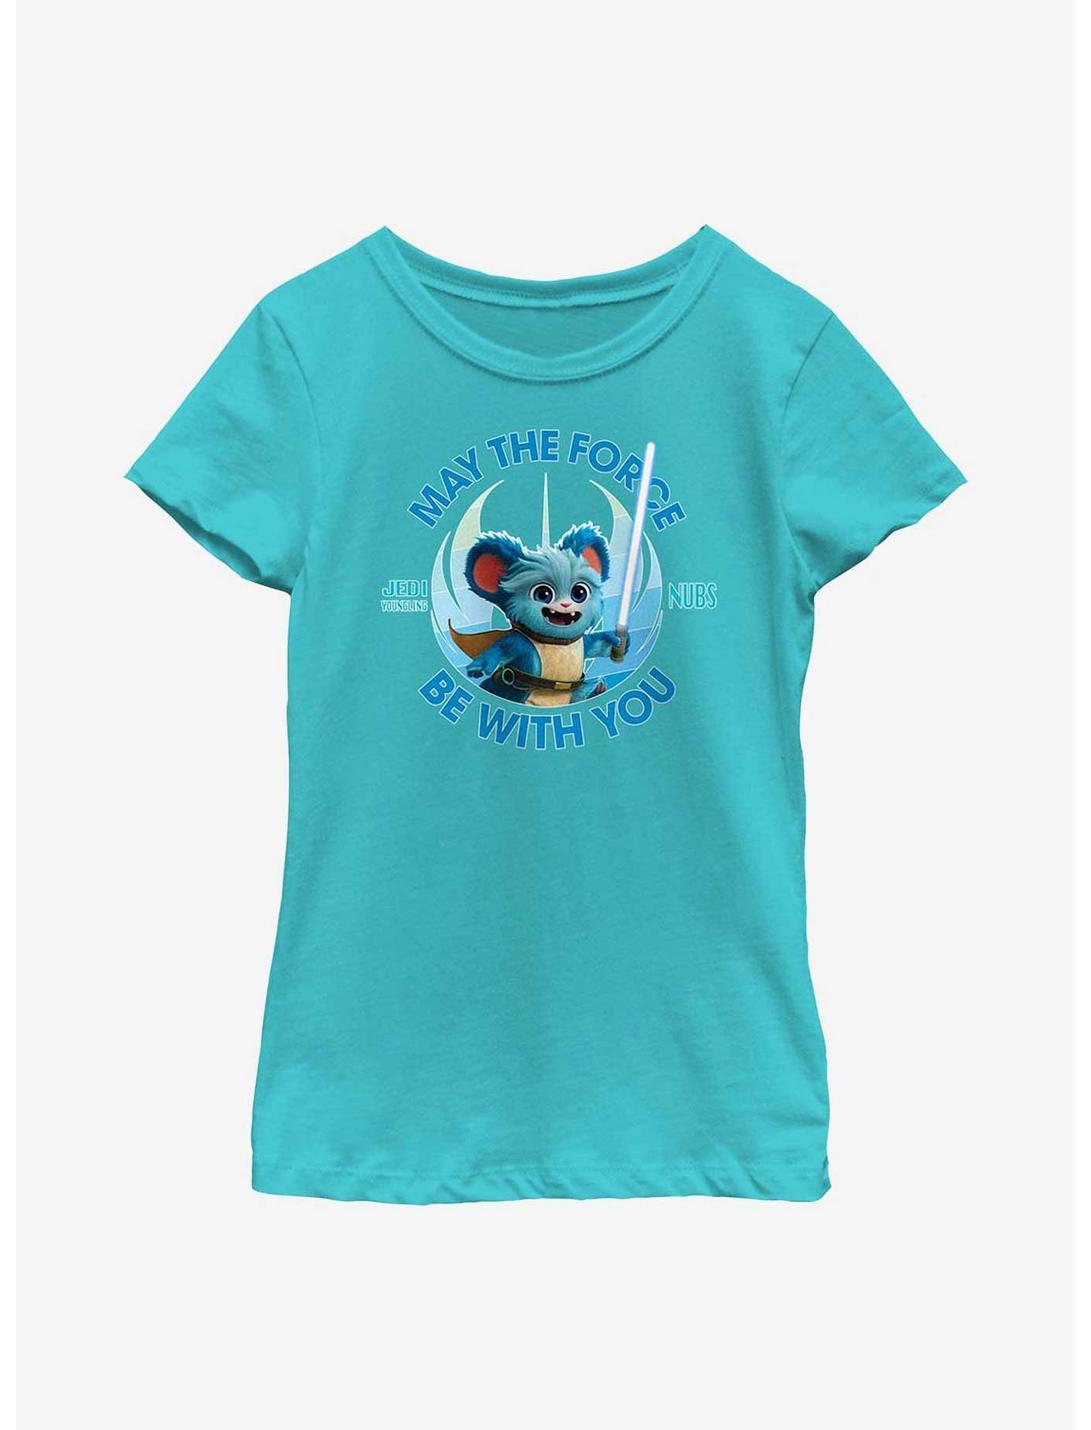 Star Wars: Young Jedi Adventures Nubs May The Force Be With You Youth Girls T-Shirt, TAHI BLUE, hi-res